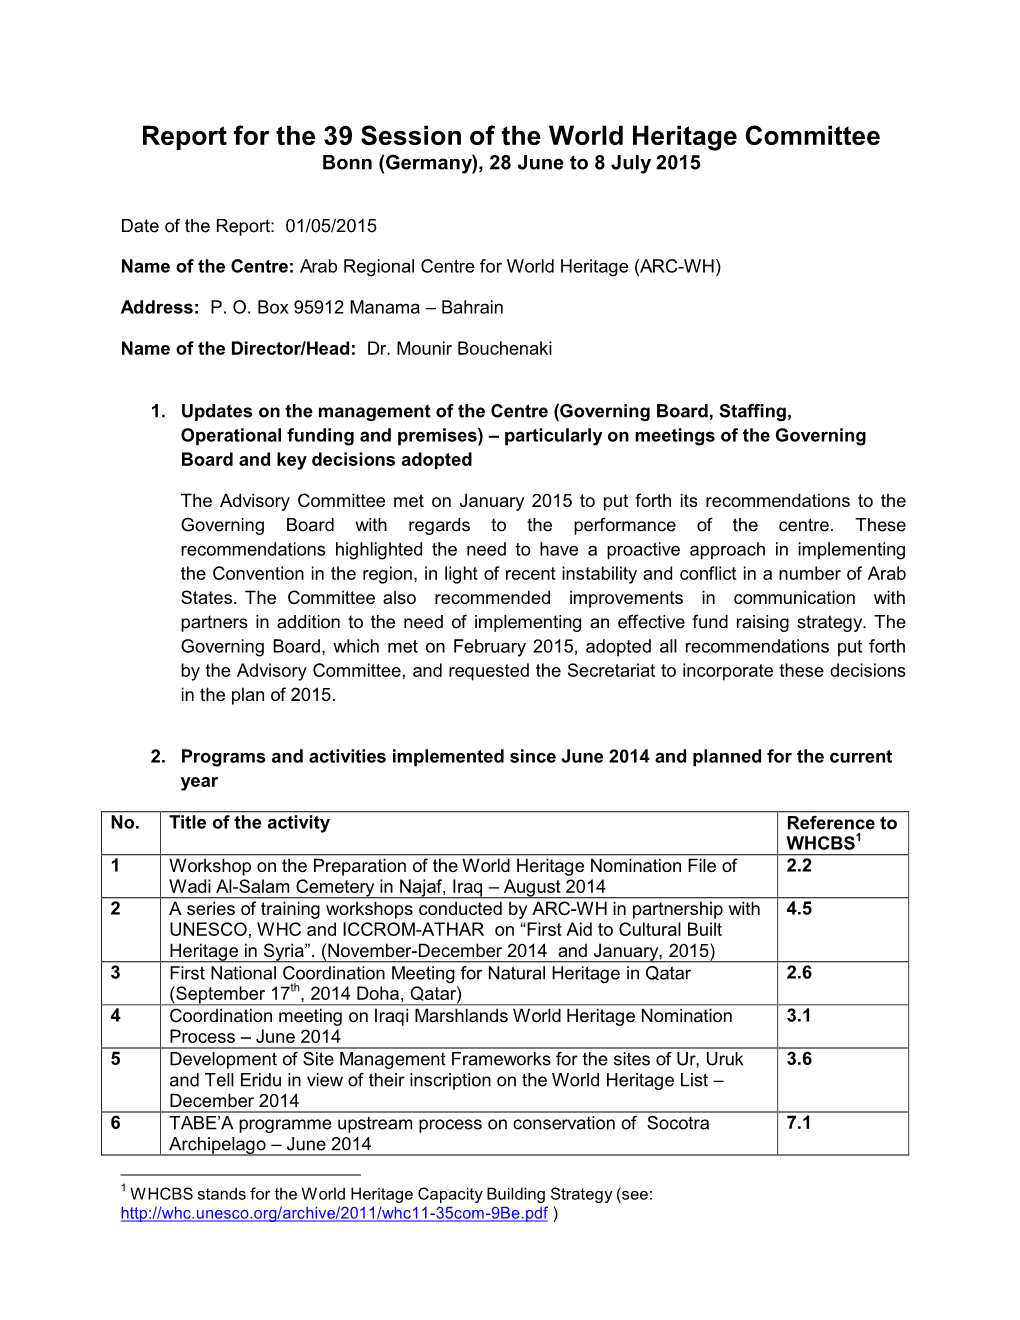 Report for the 39 Session of the World Heritage Committee Bonn (Germany), 28 June to 8 July 2015